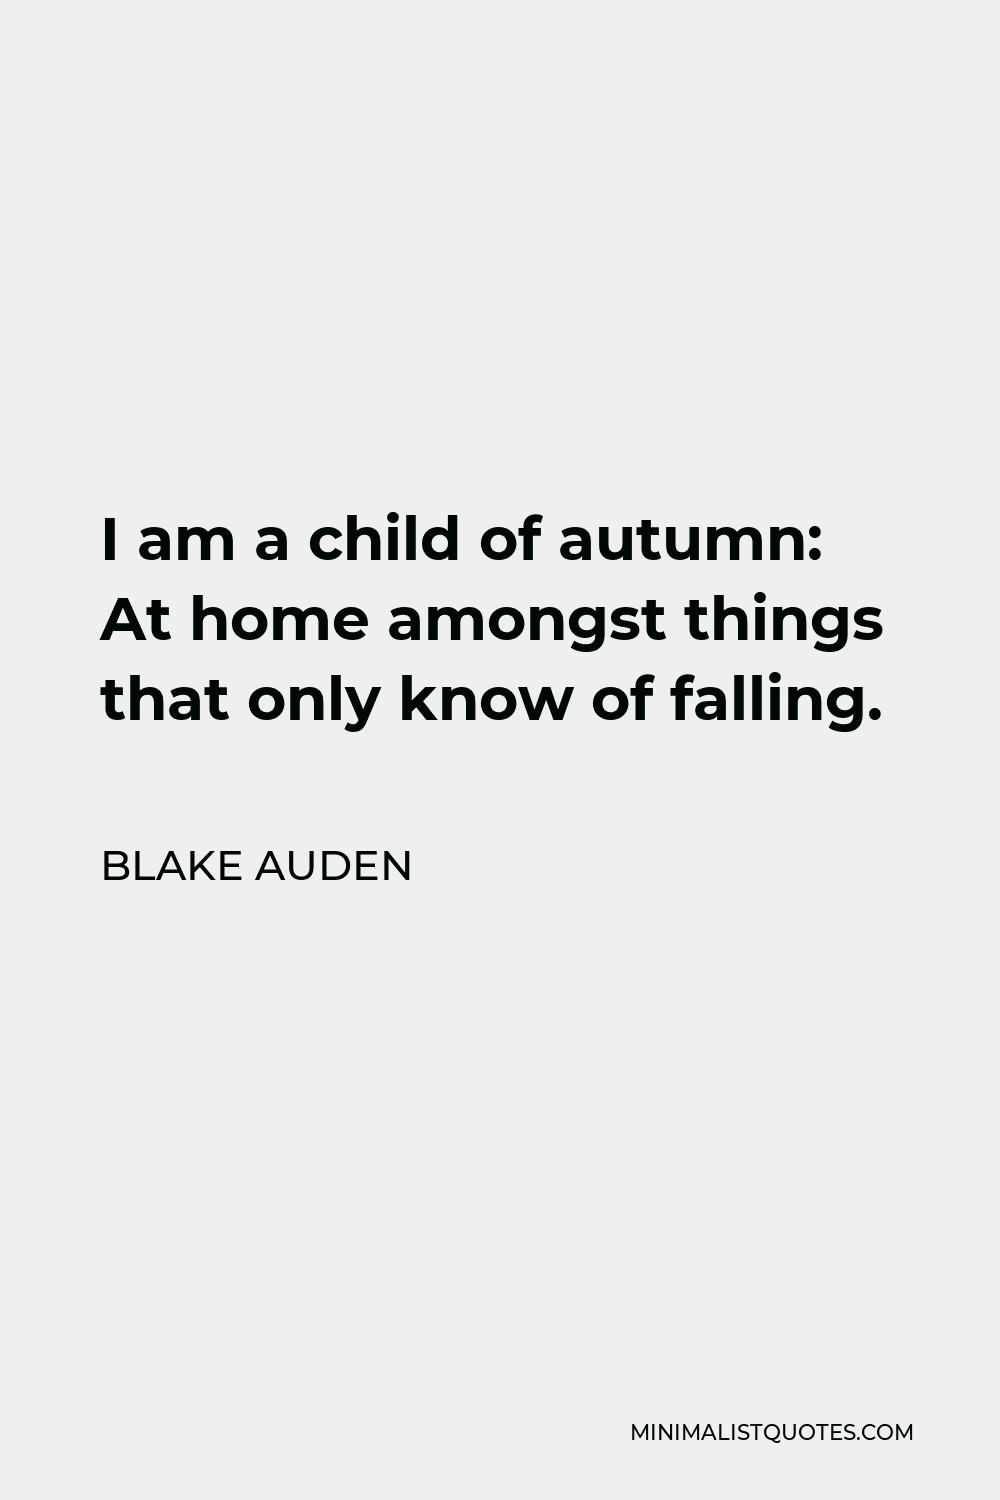 Blake Auden Quote - I am a child of autumn: At home amongst things that only know of falling.